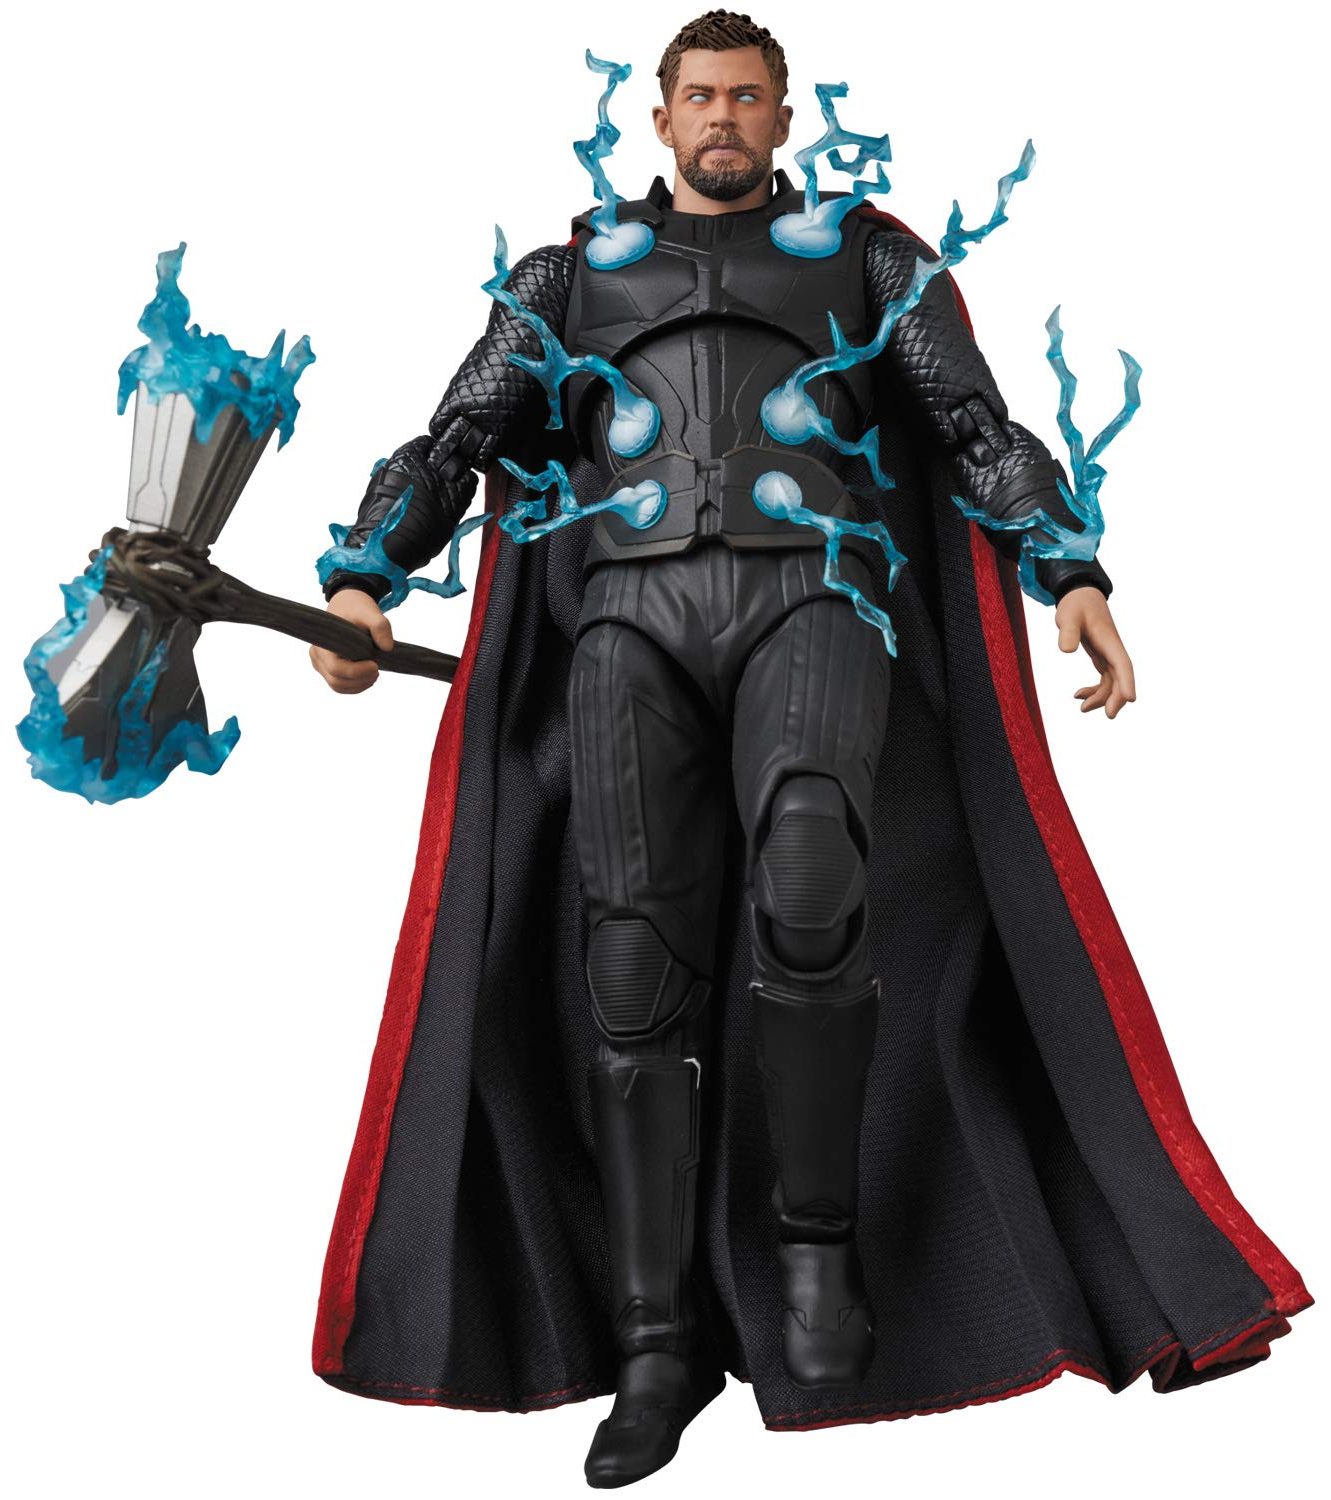 MAFEX Avengers Infinity War Thor Figure Up for Order! - Marvel Toy News